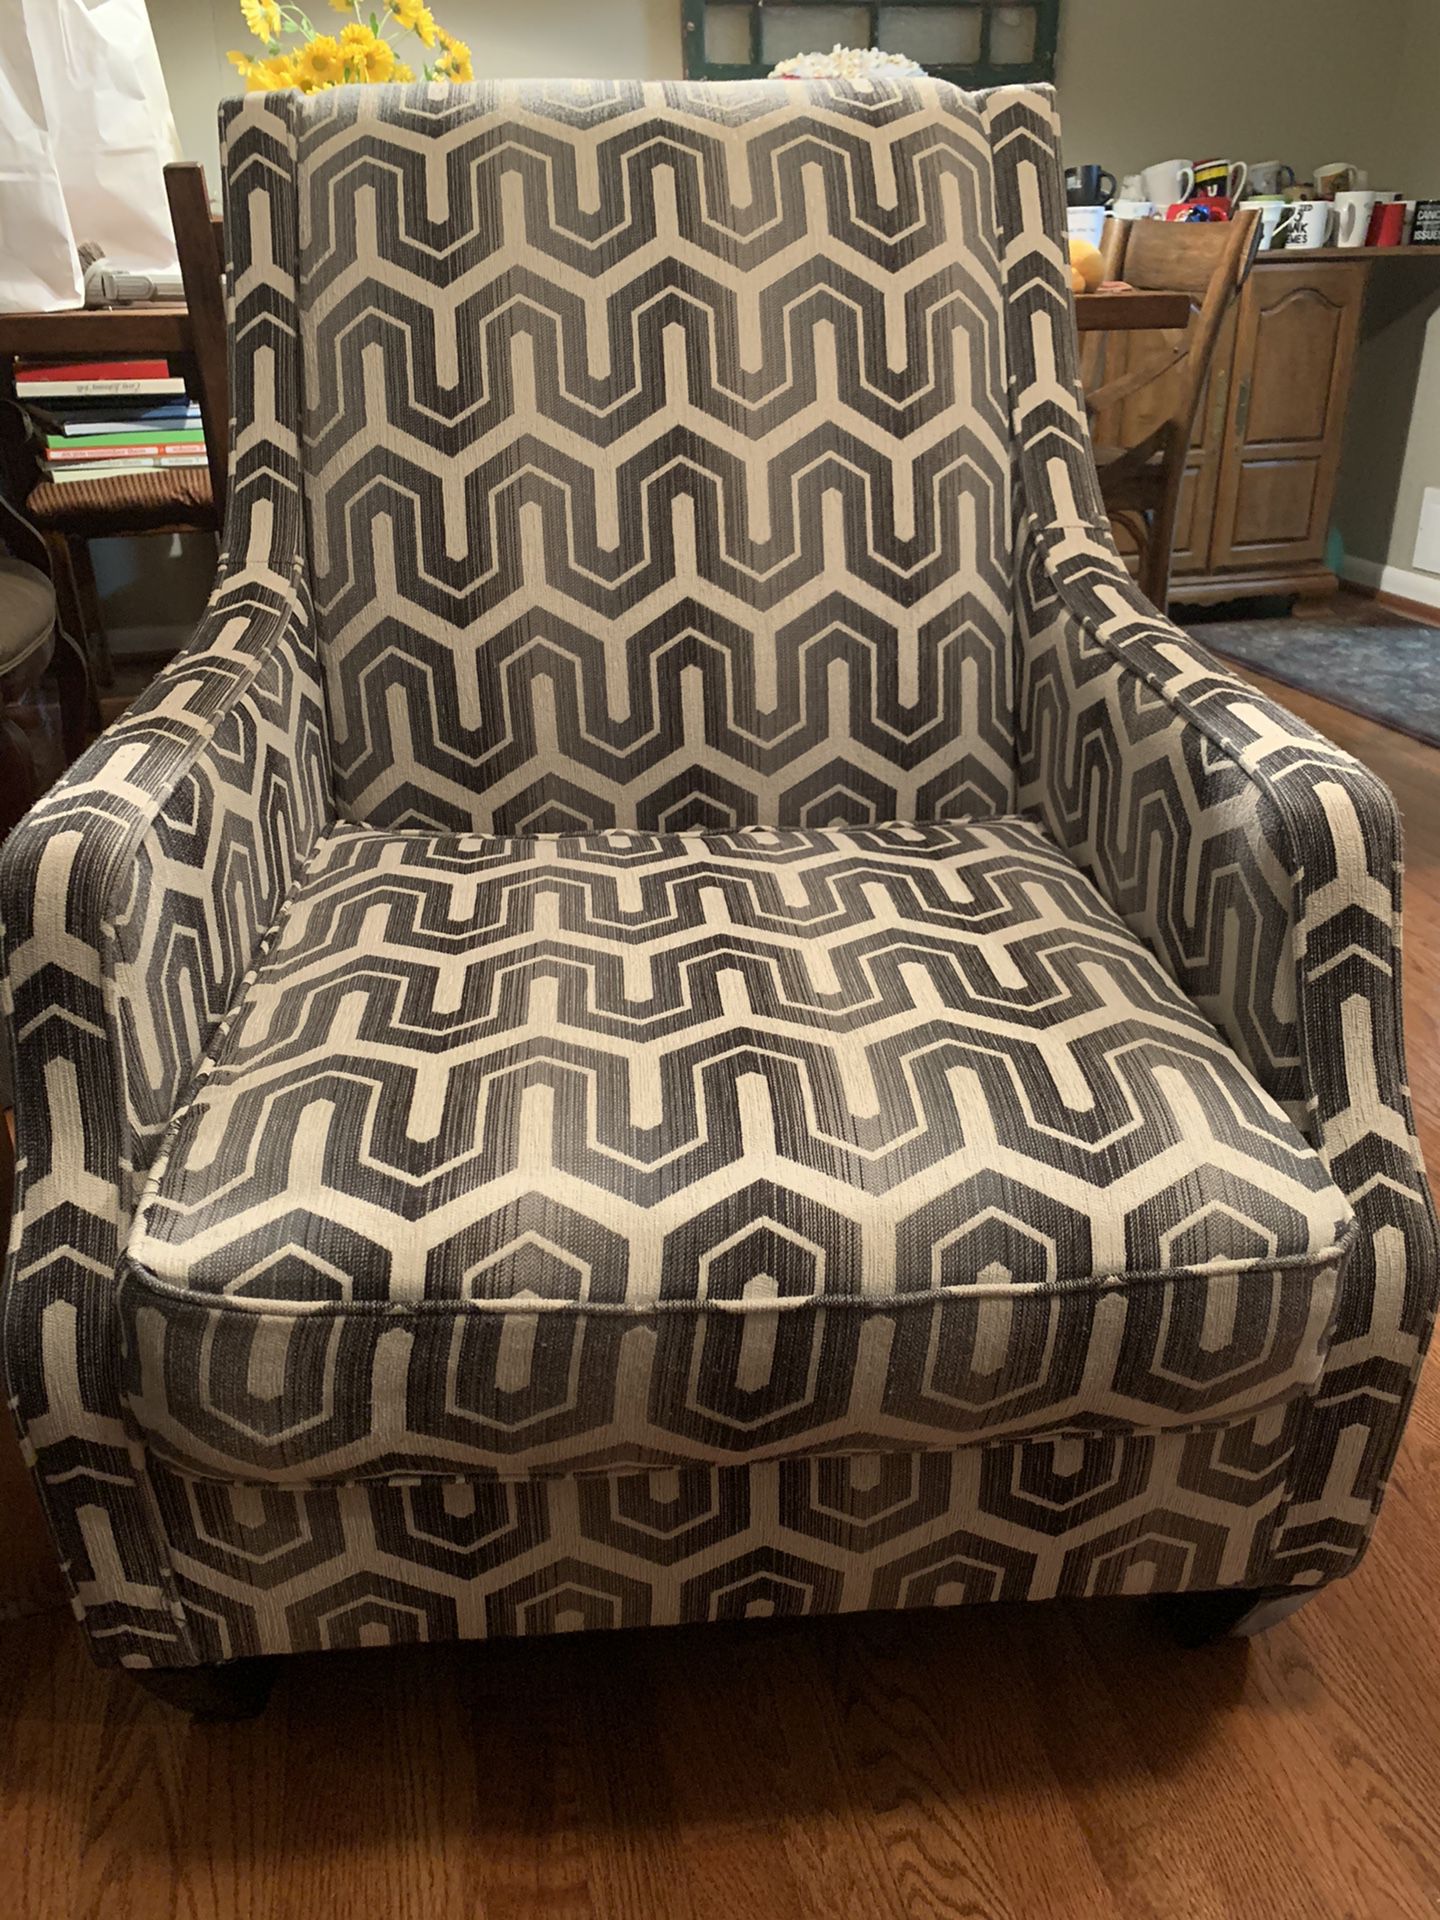 2 Accent chairs - $90 each